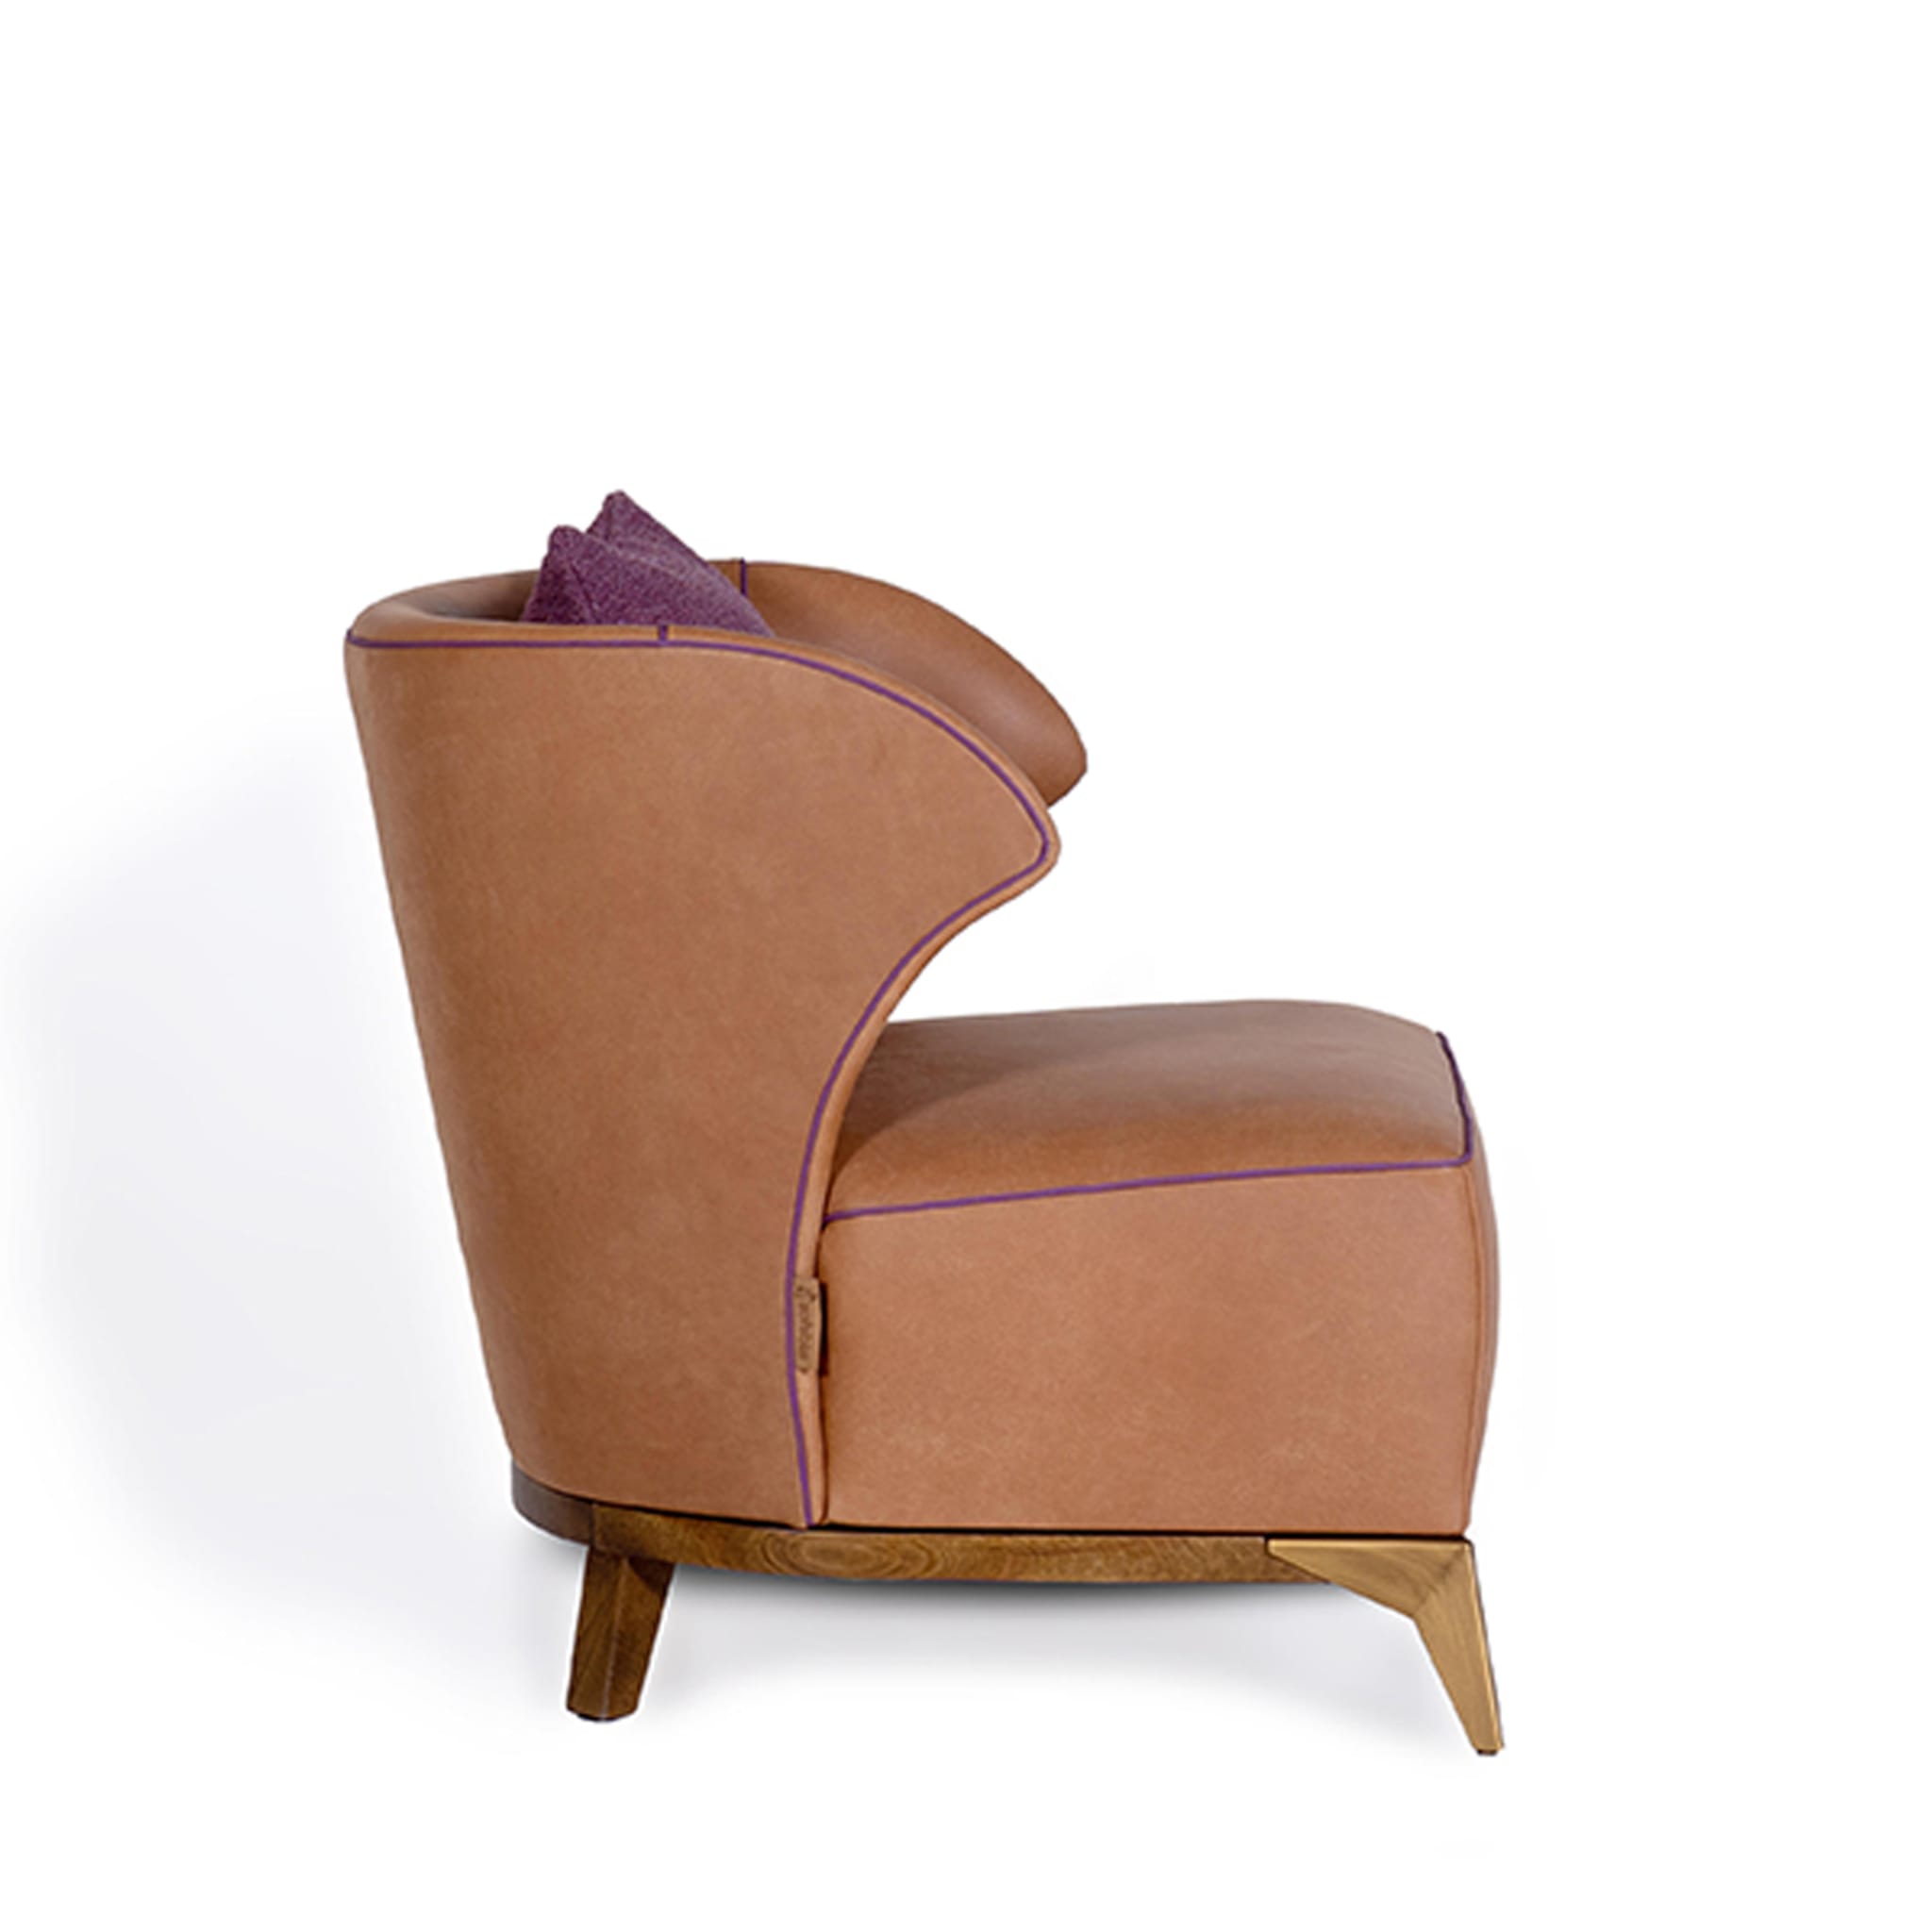 Agostina Light Brown Leather Lounge Chair - Alternative view 2